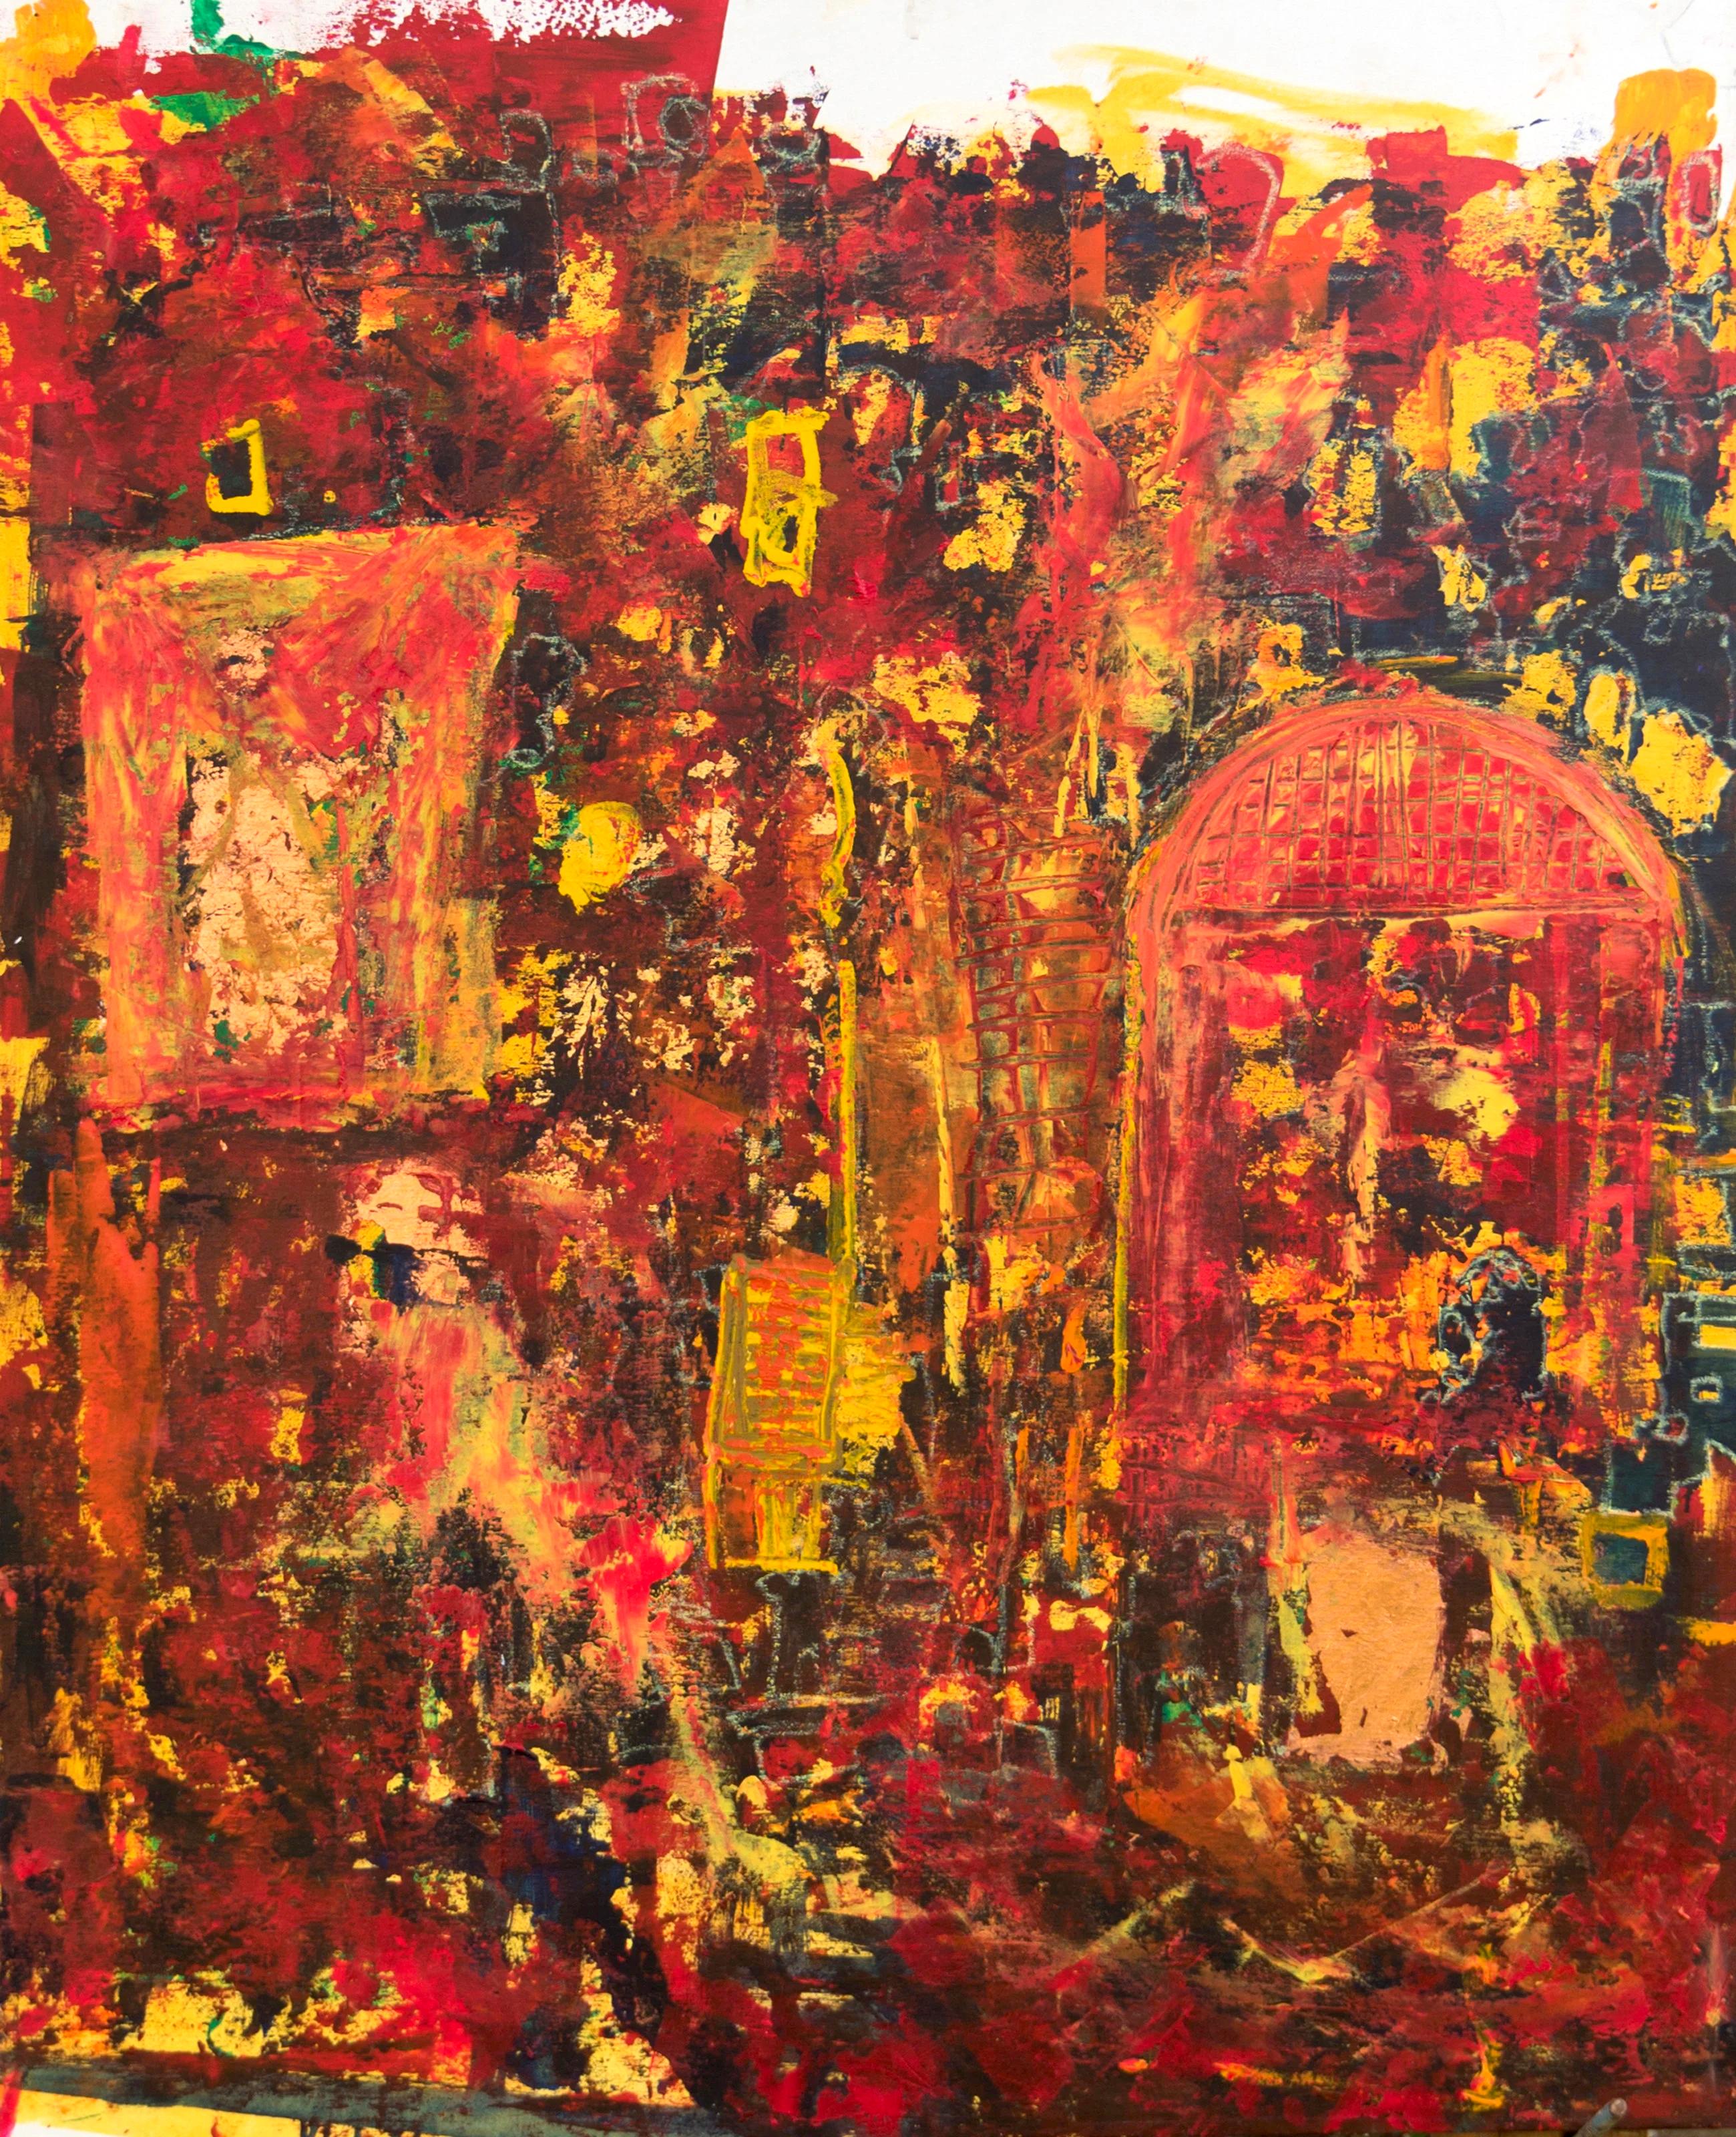 "Passage IV" Abstract Painting 51" x 35" inch by Ahmed Farid 